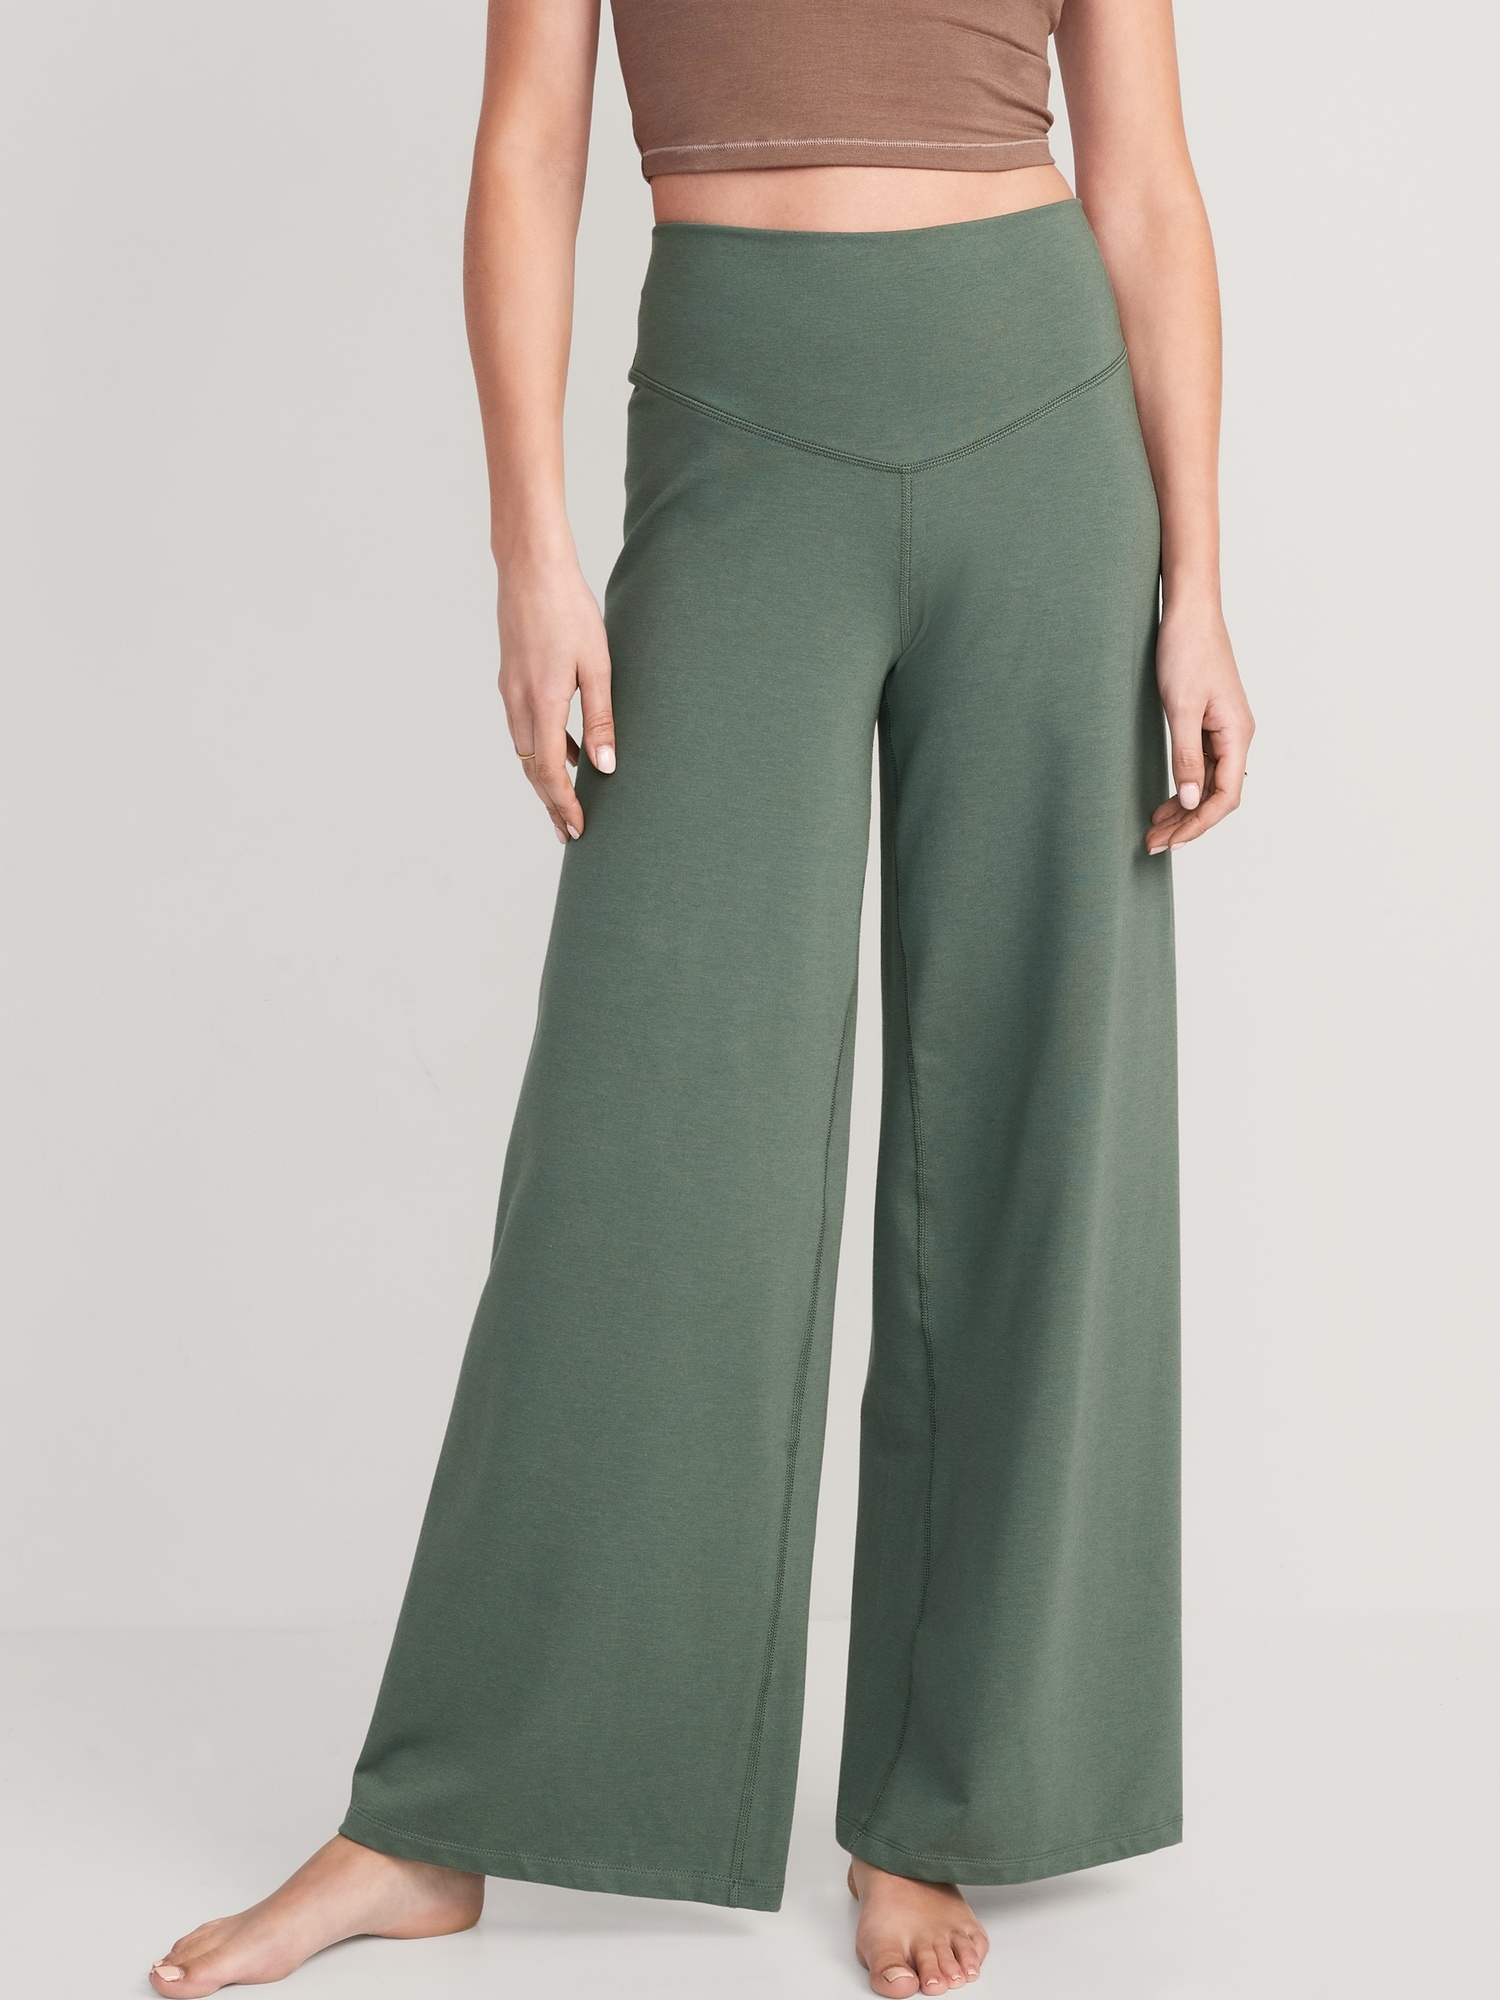 Old Navy - Extra High-Waisted PowerChill Wide-Leg Yoga Pants for Women green